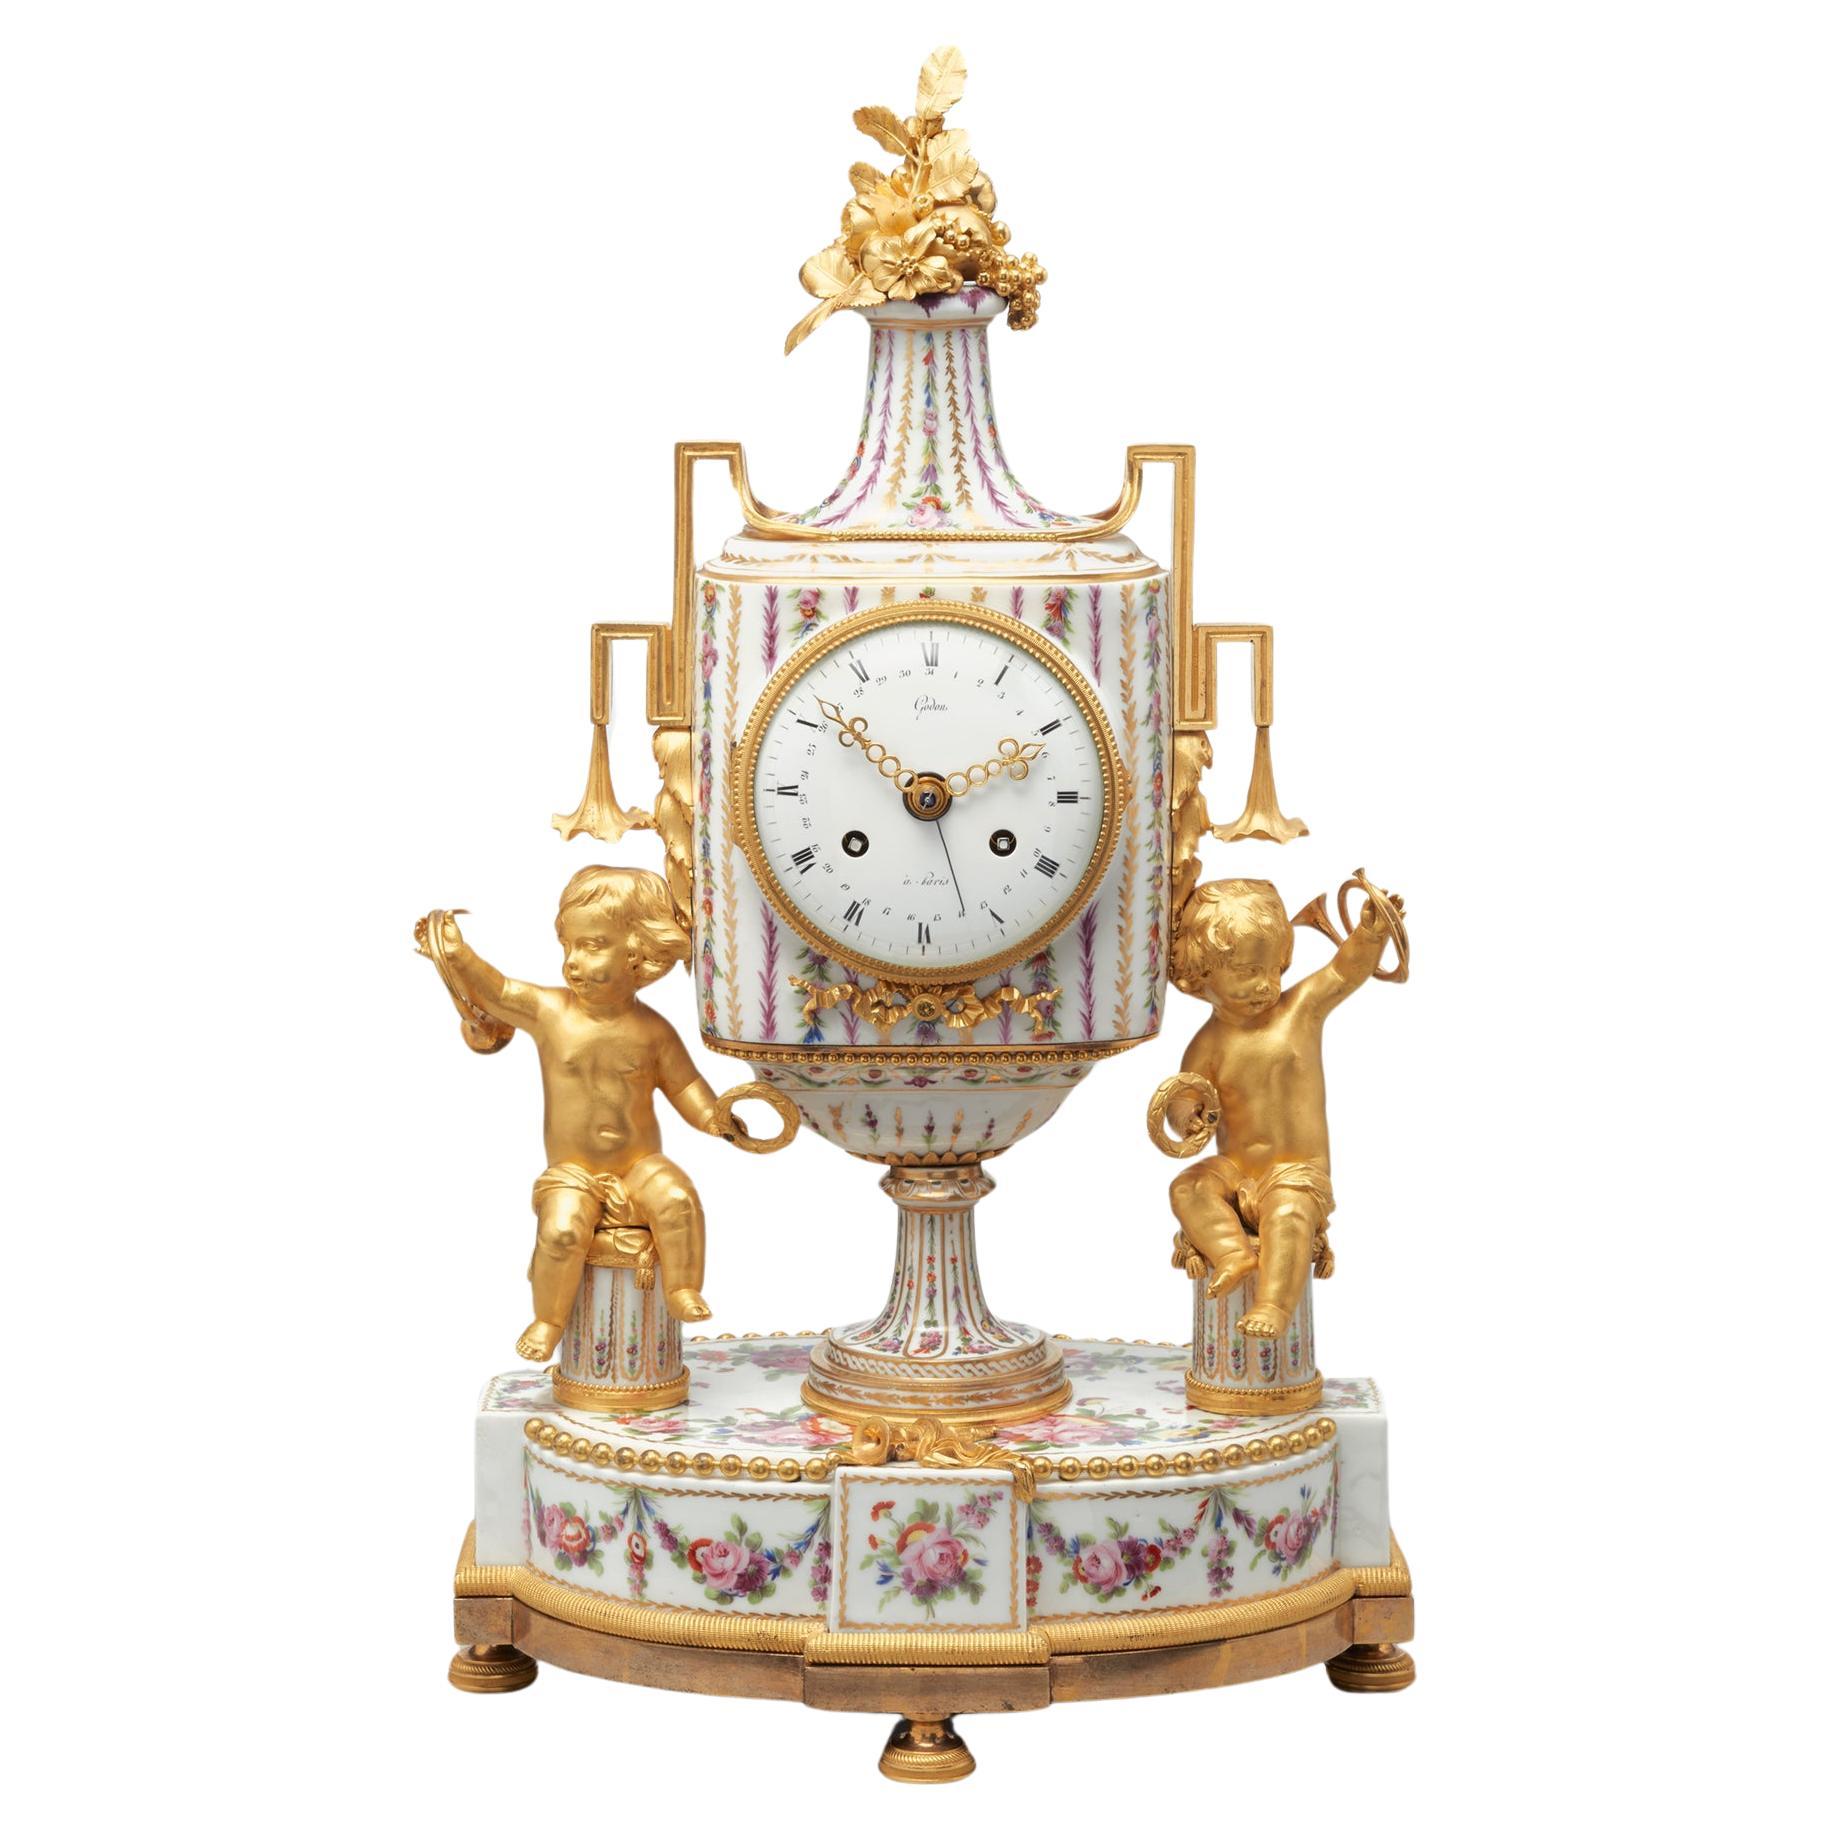 Rare French porcelain and gilt bronze mantel clock by Godon